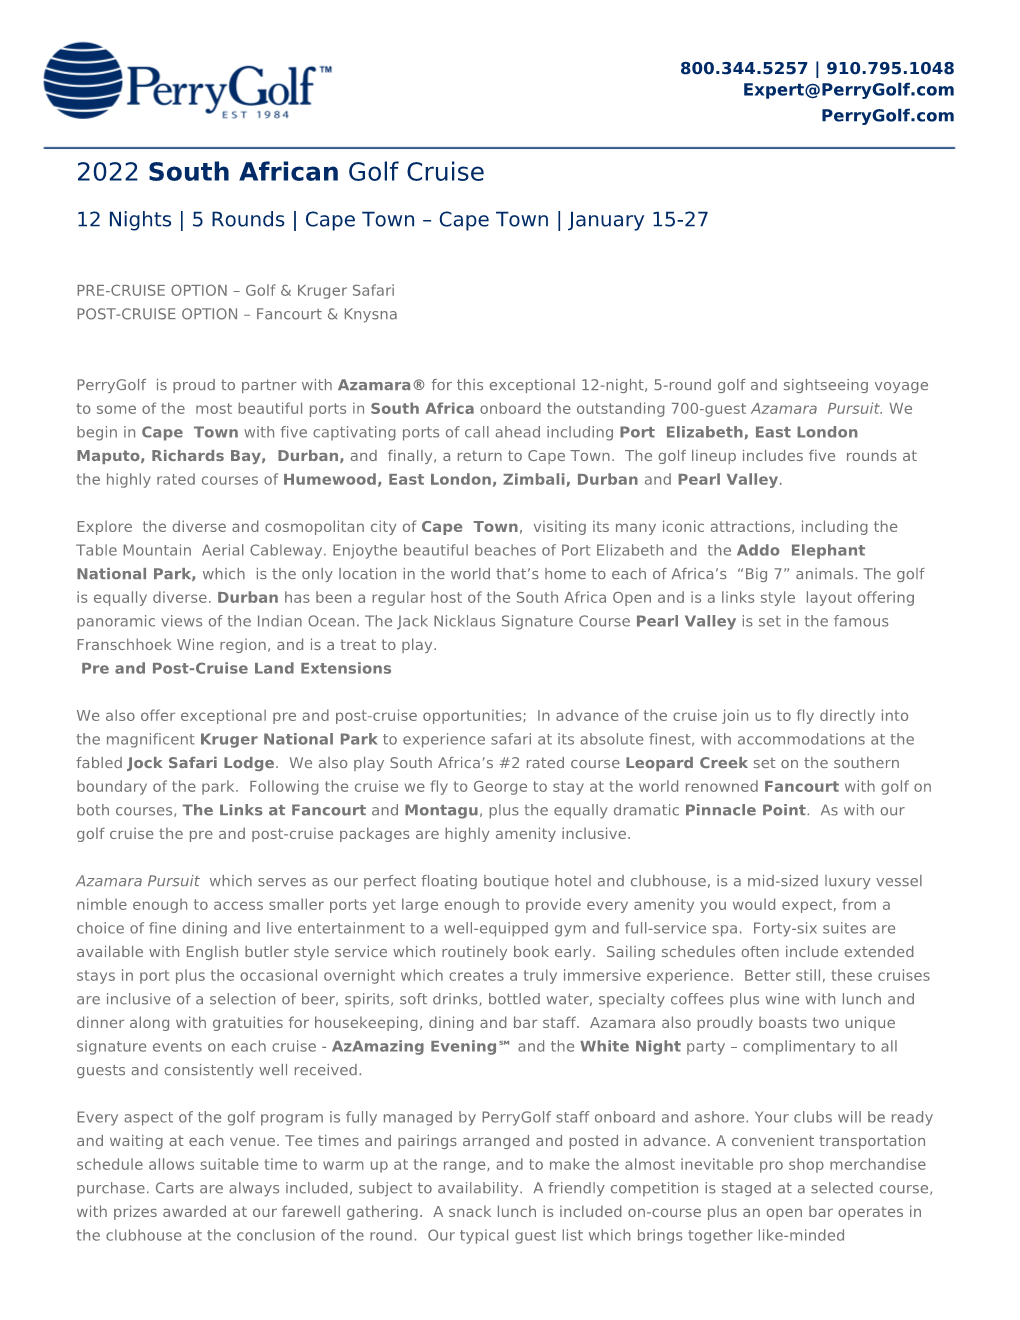 2022 South African Golf Cruise